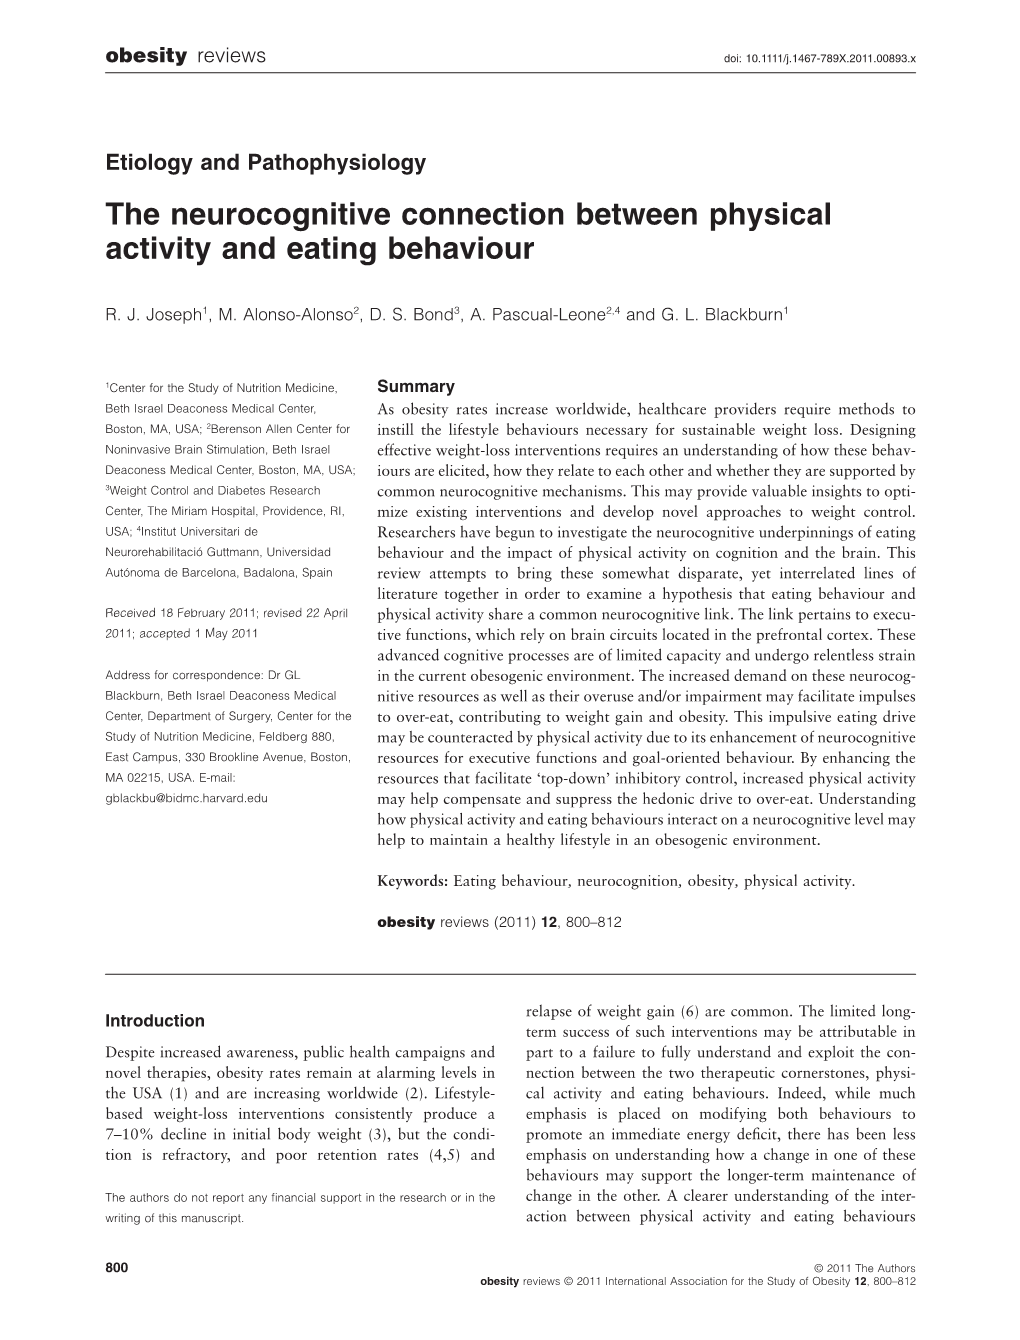 The Neurocognitive Connection Between Physical Activity And